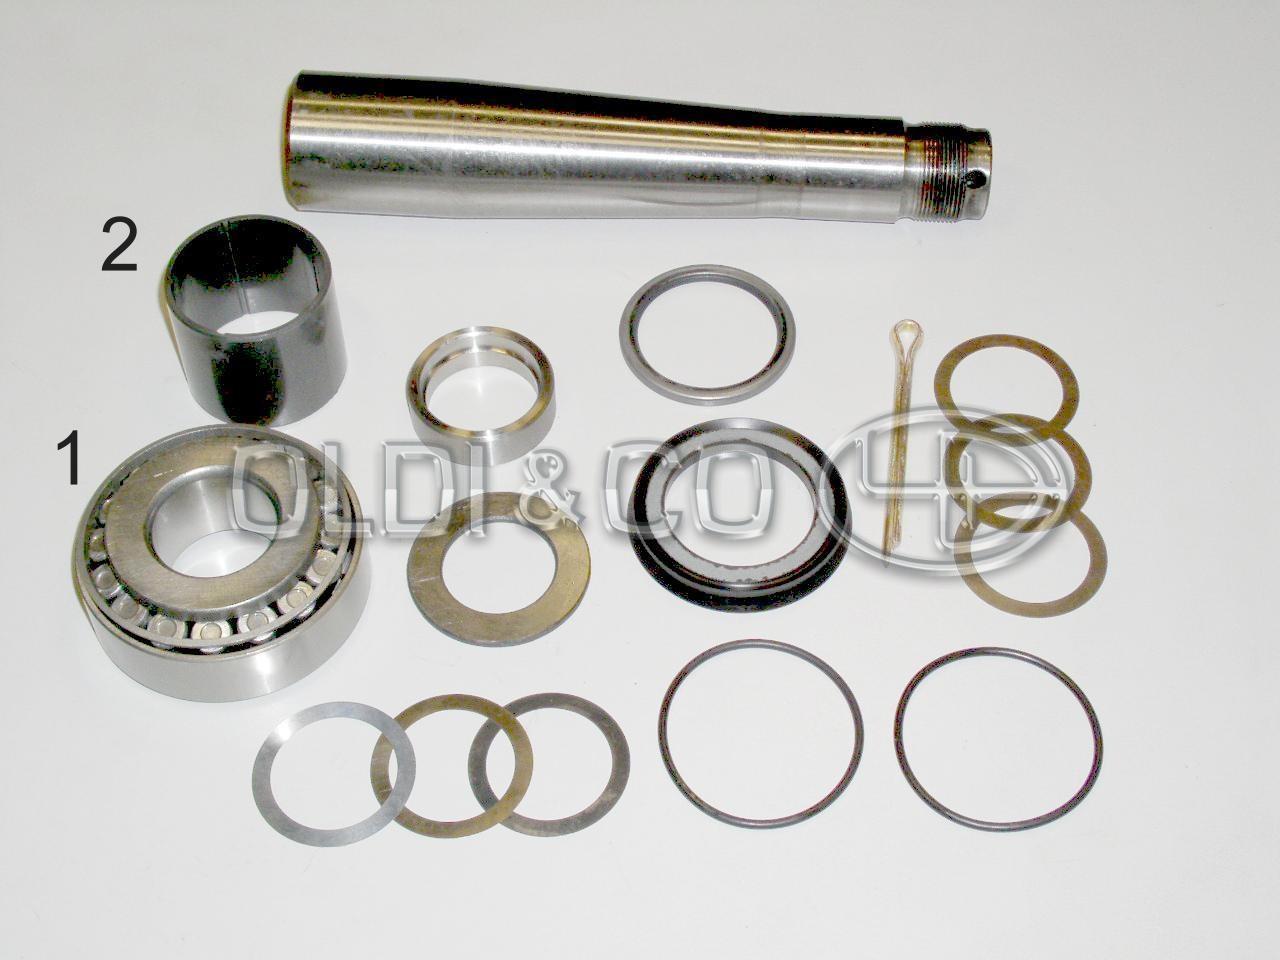 34.074.28630 Suspension parts → King pin - steering knuckle rep. kit